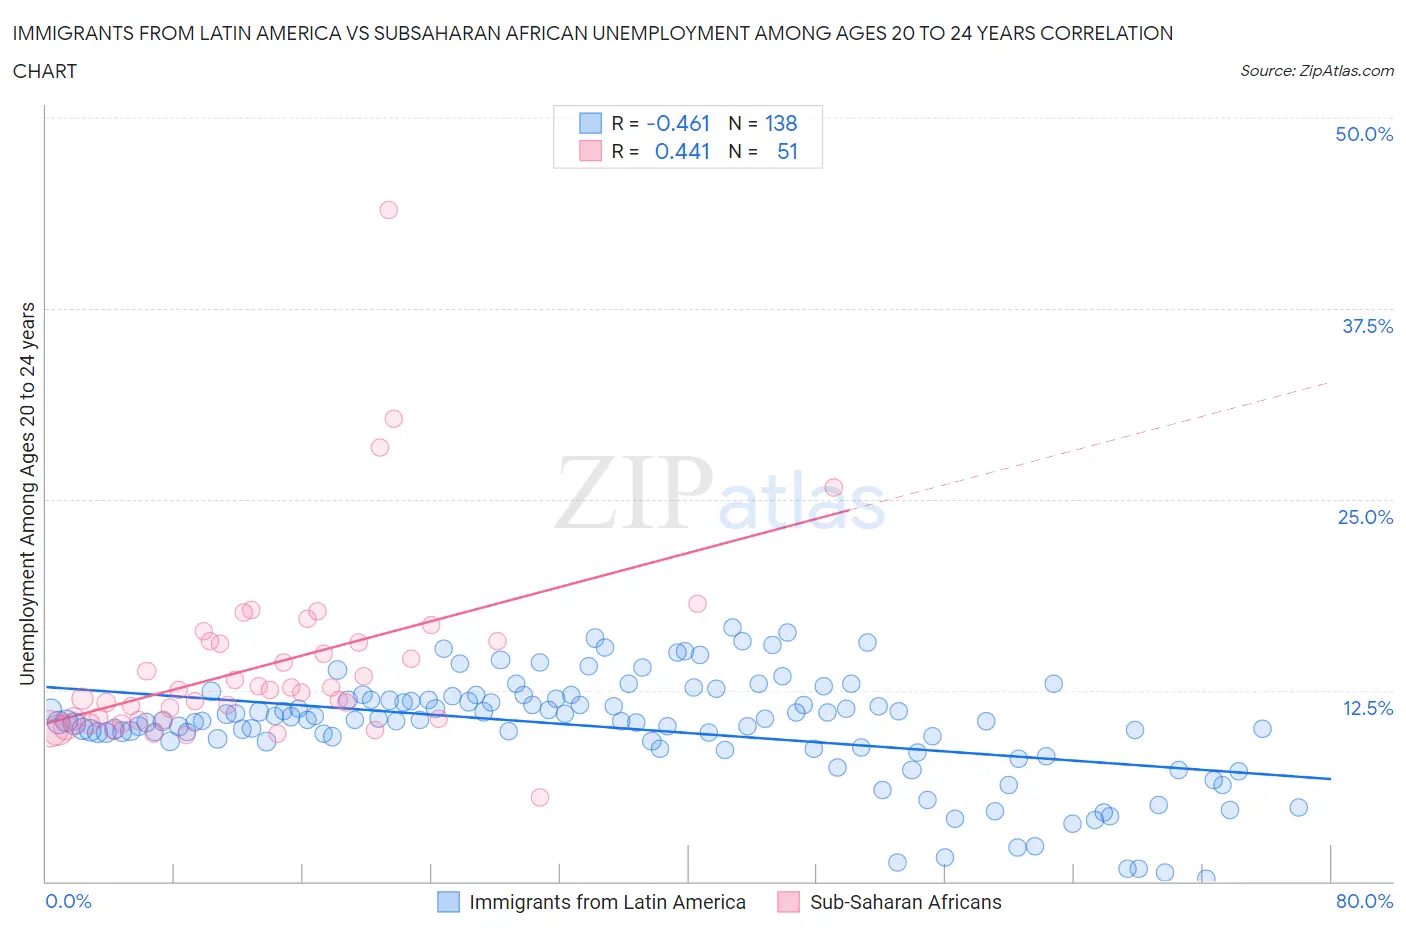 Immigrants from Latin America vs Subsaharan African Unemployment Among Ages 20 to 24 years